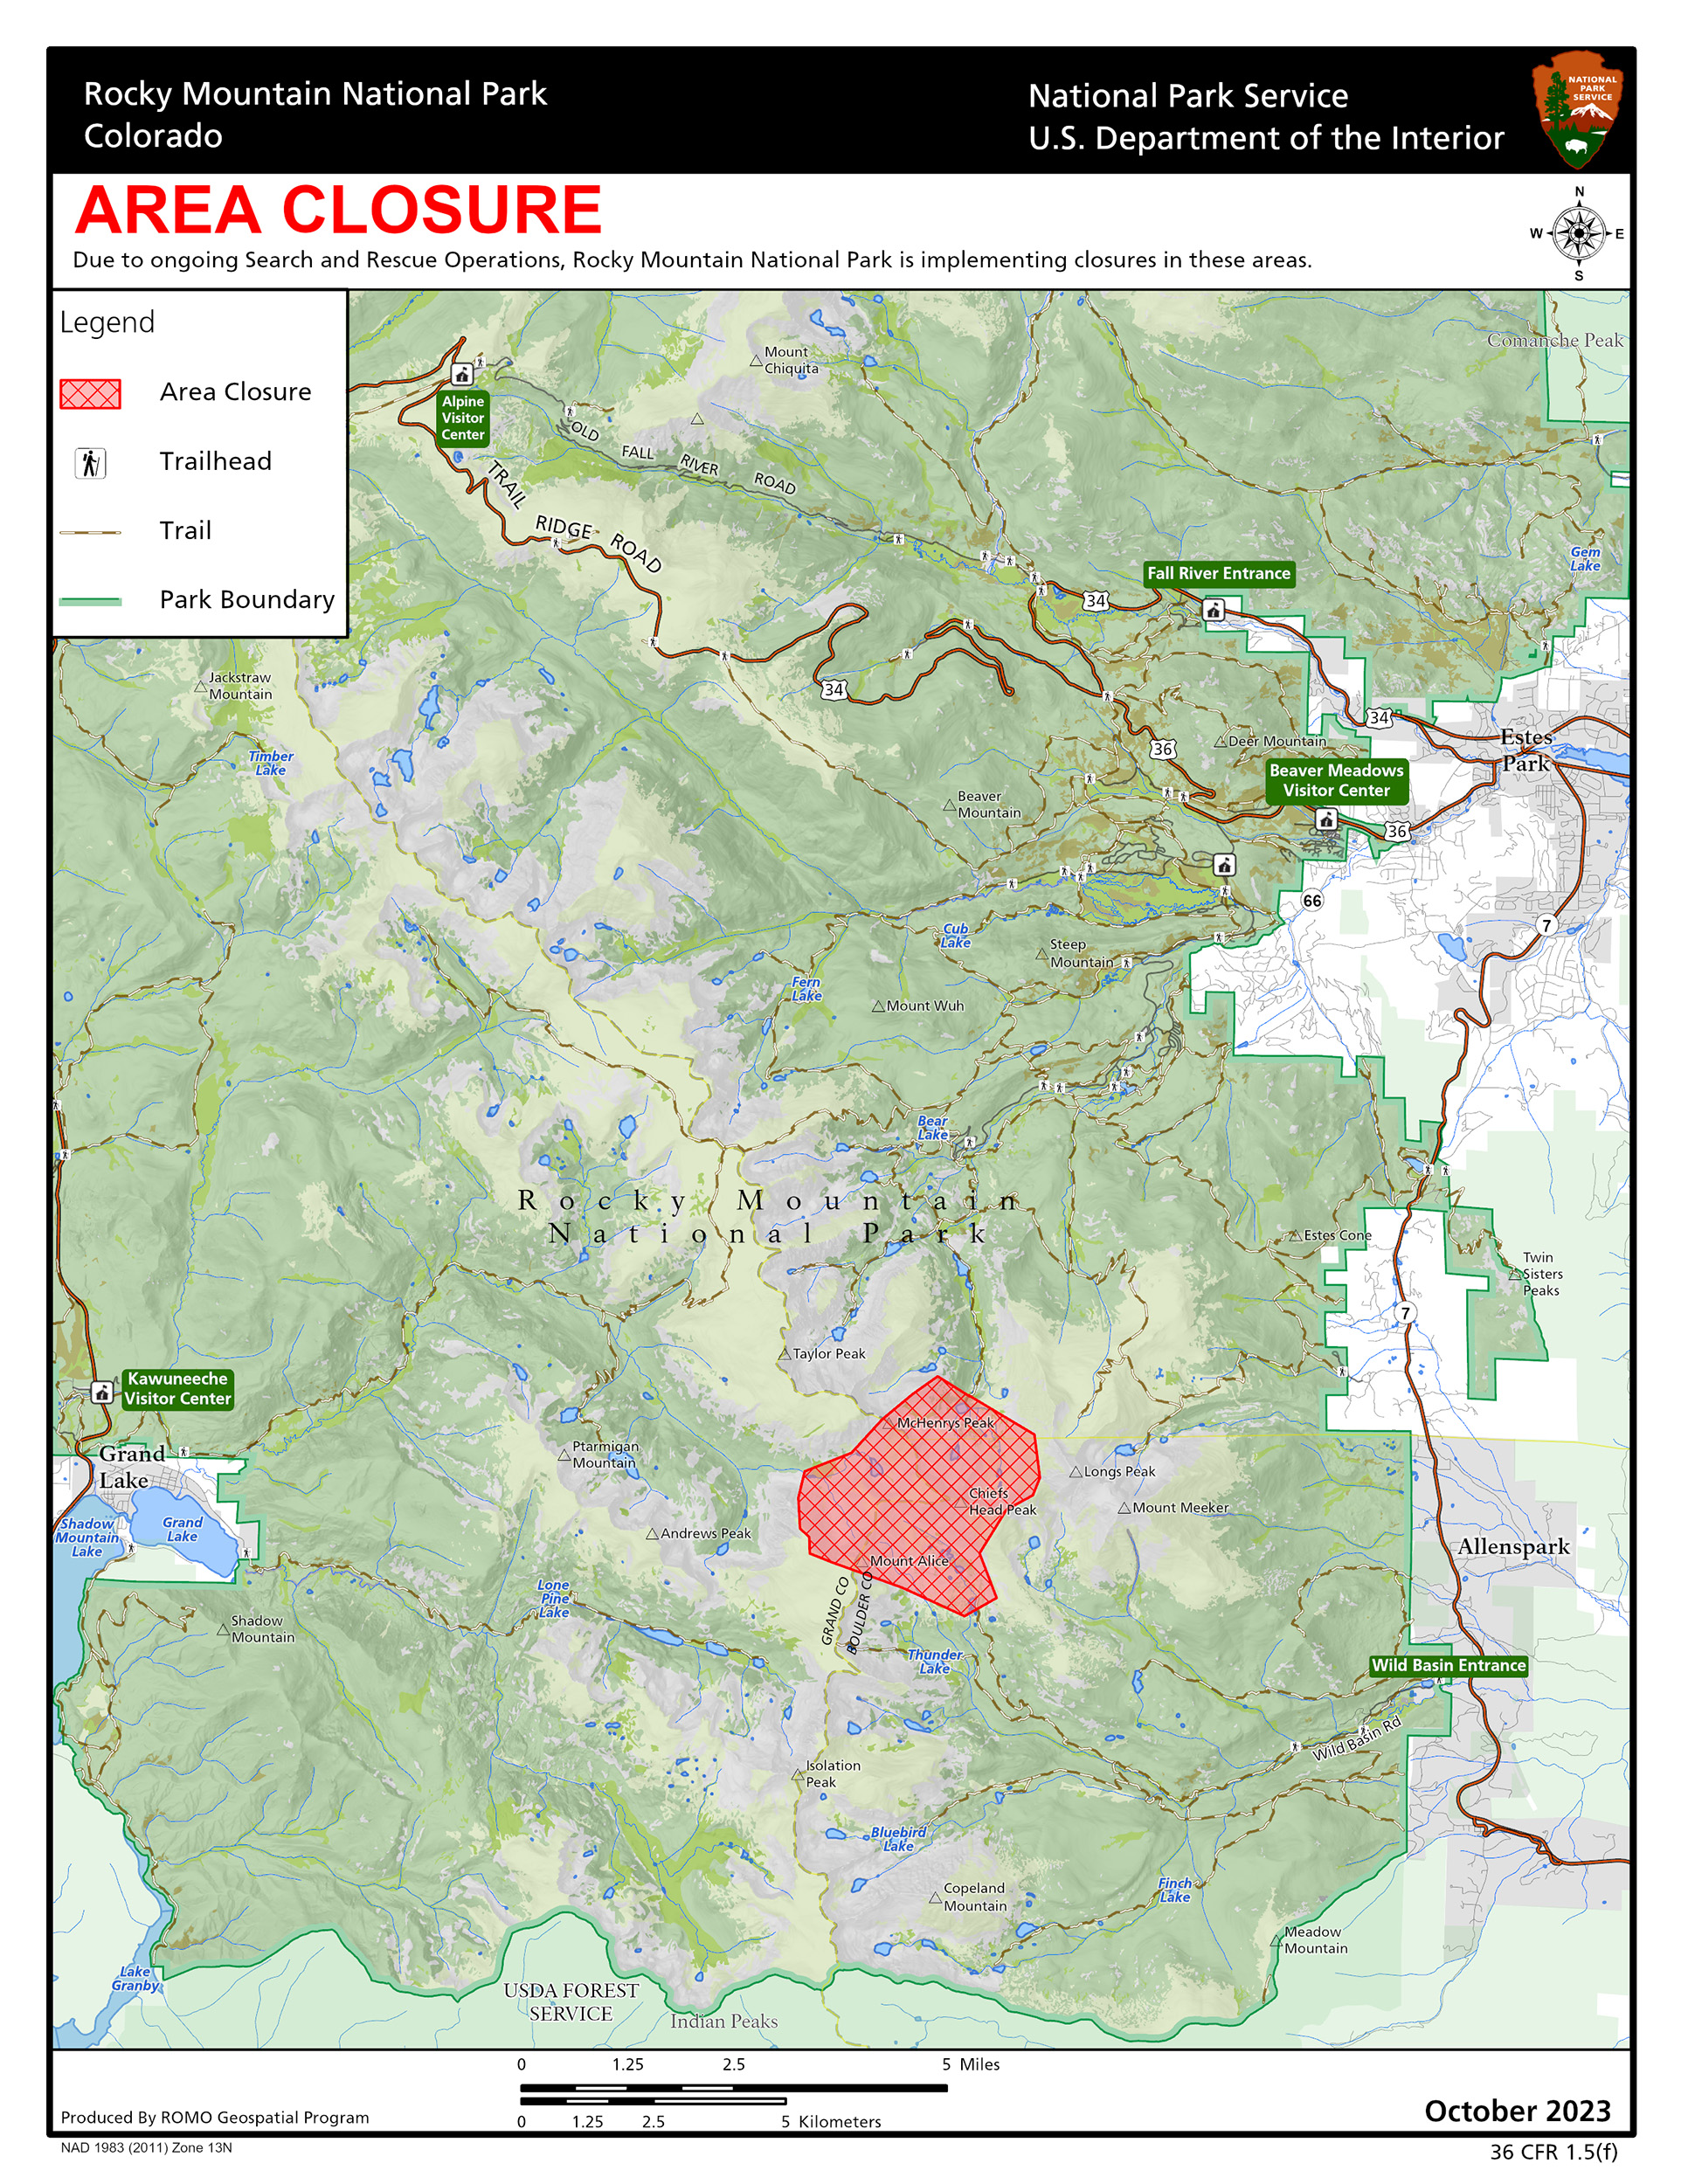 Map of Rocky Mountain National Park indicating a closure area from Mount Alice, Chiefs Head Peak, to north of McHenry's Peak